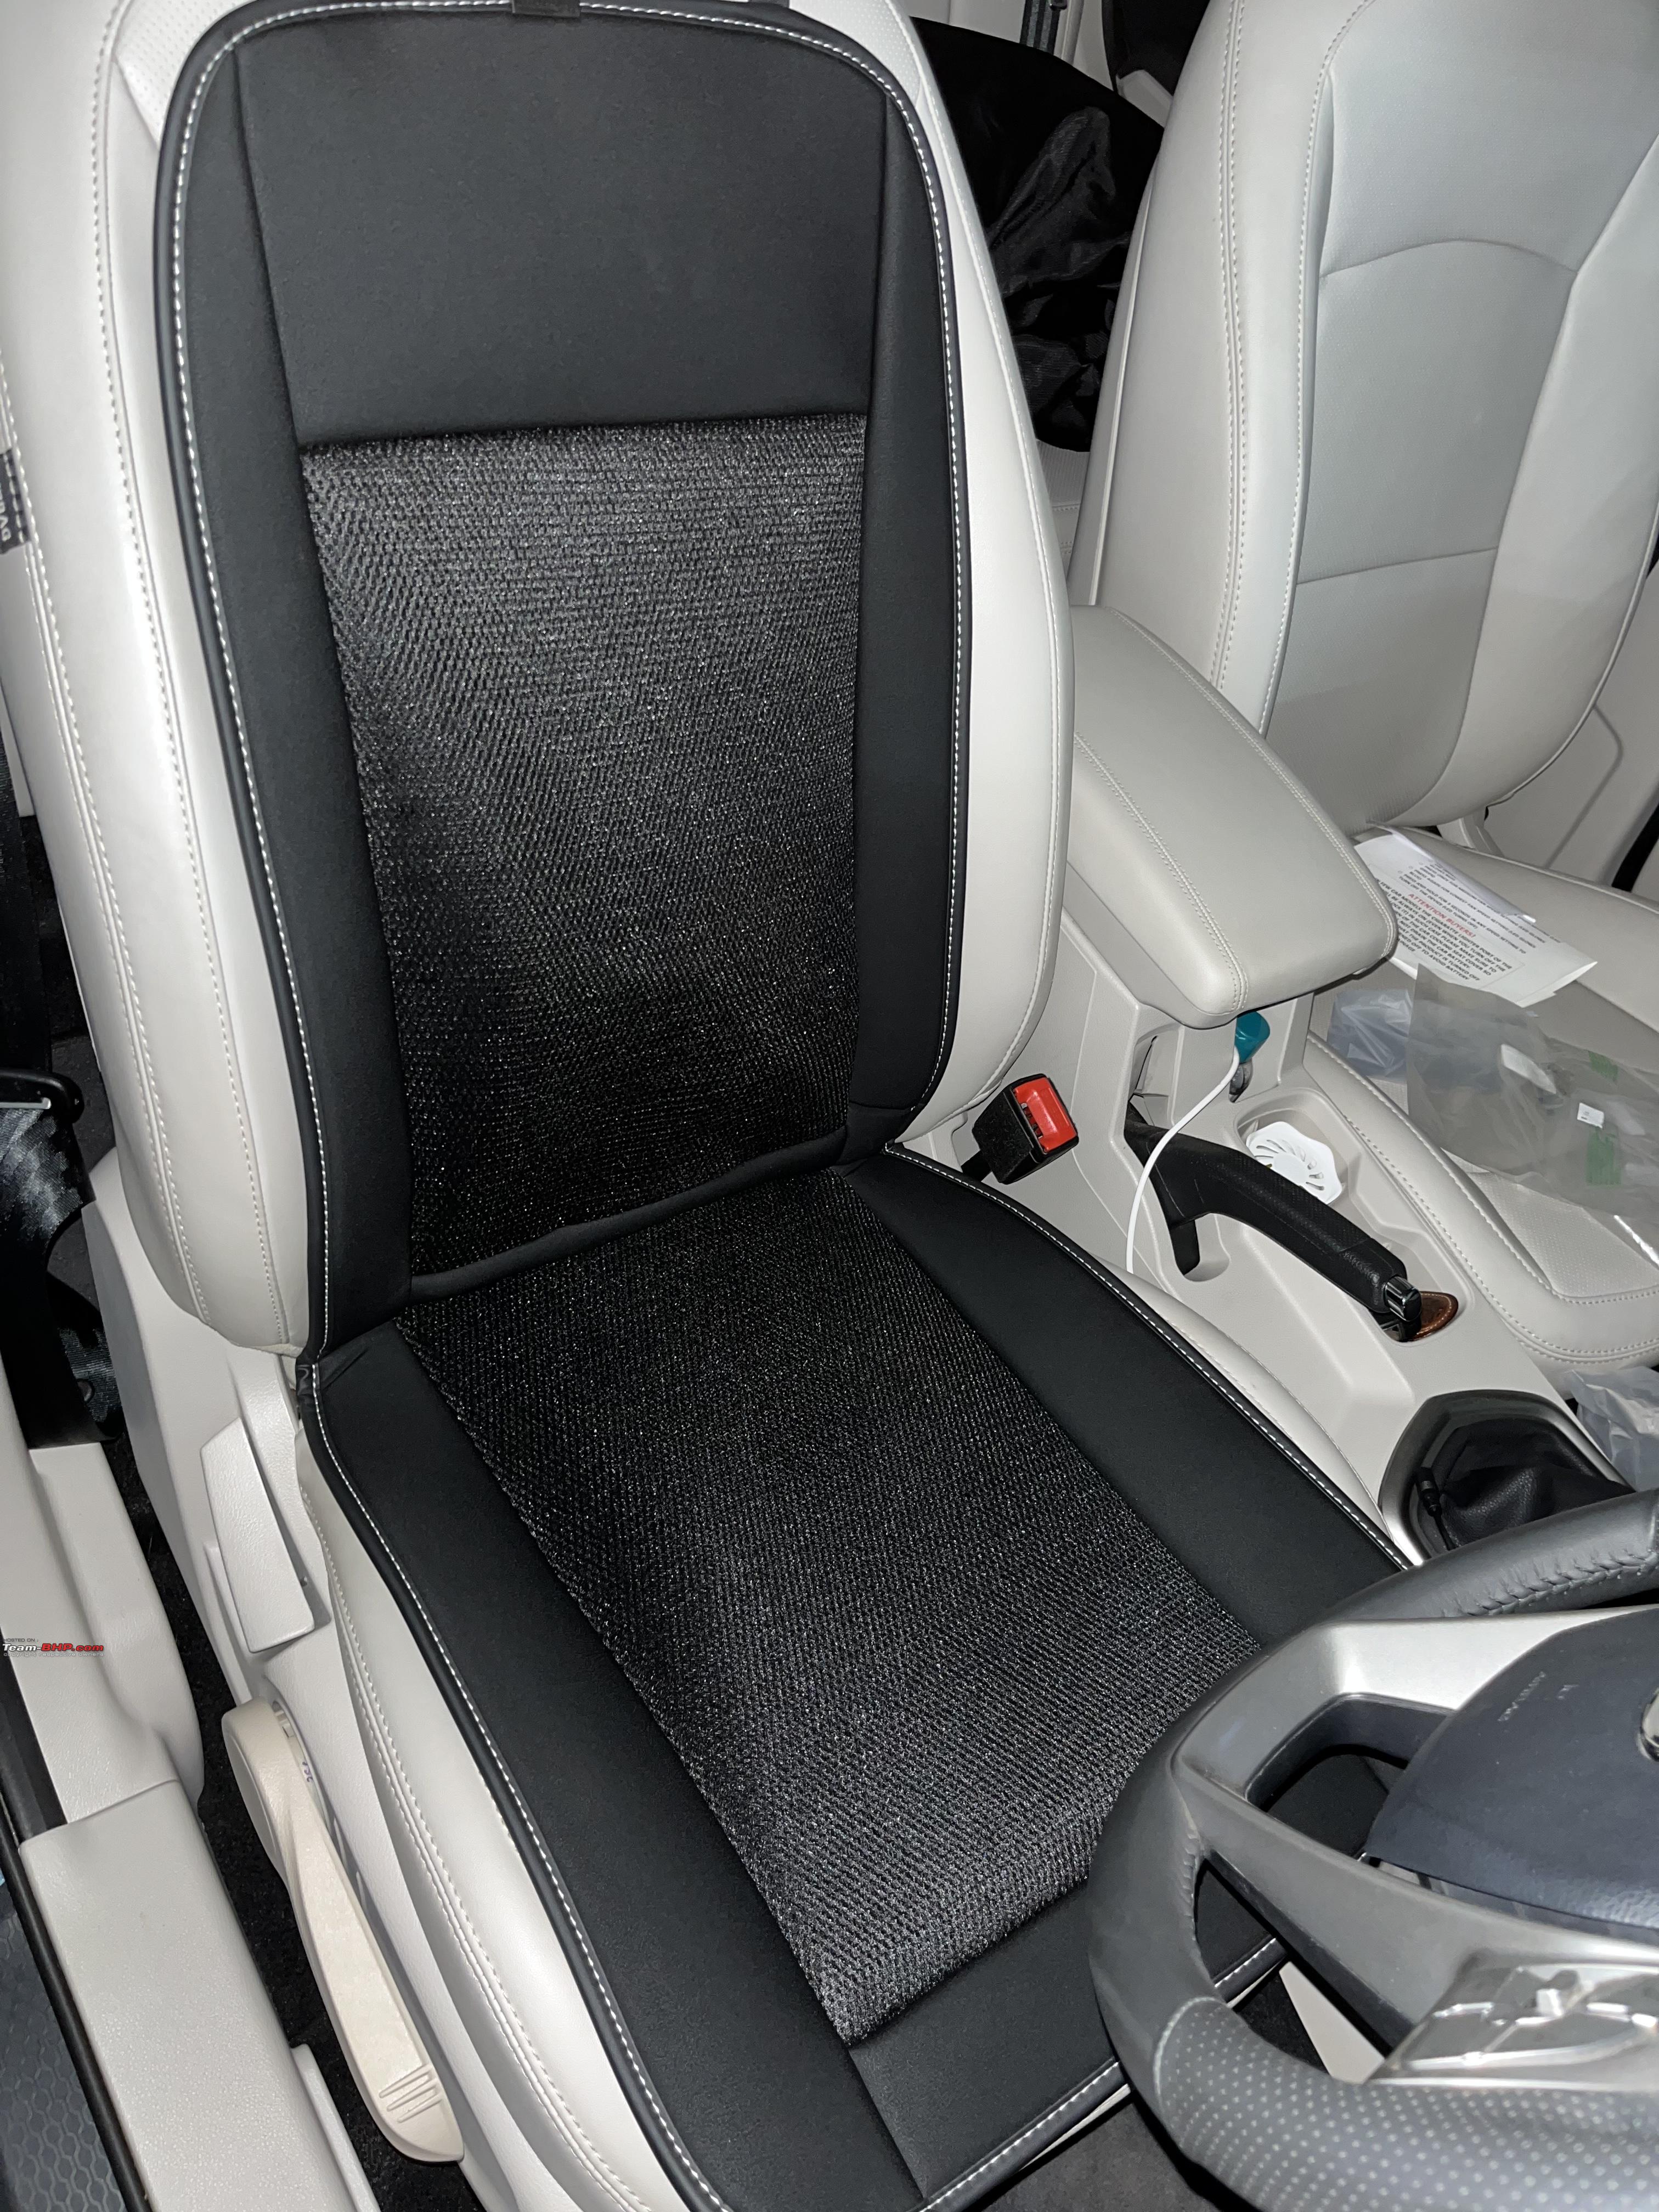 https://www.team-bhp.com/forum/attachments/modifications-accessories/2392654d1671603147-riggear-ventilated-seat-covers-review-alternative-ventilated-seats-9c5b772c6a7a4483b1ef81ab7299c562.jpeg